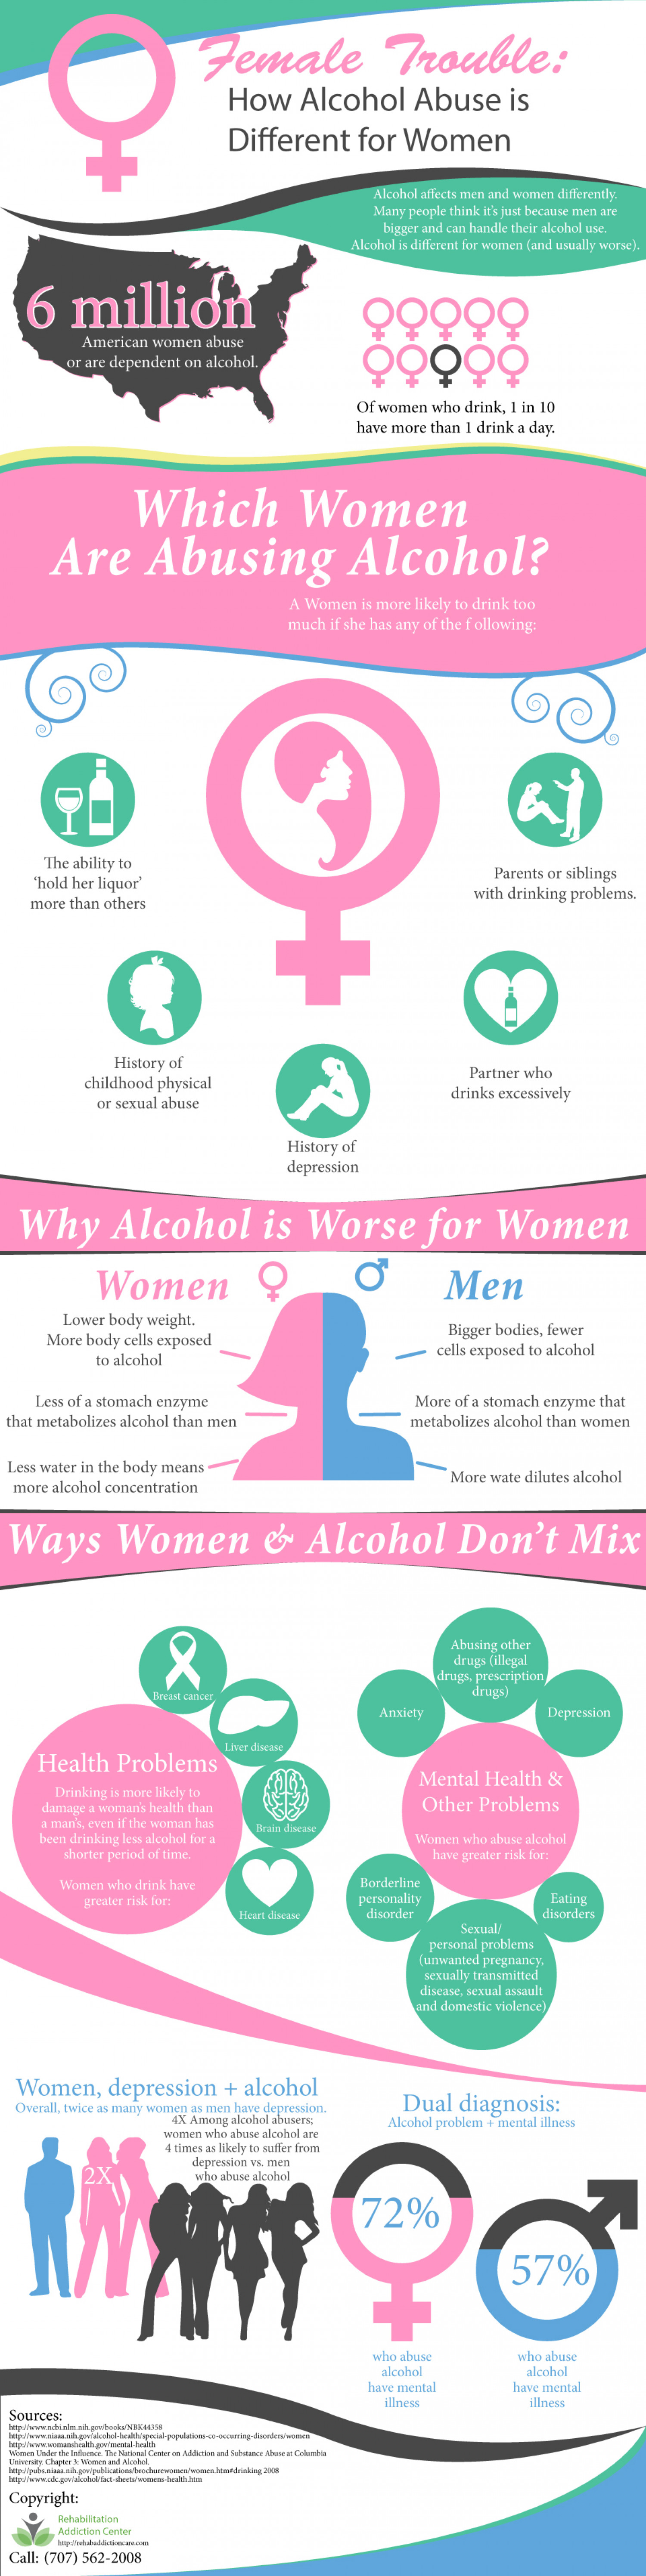 How Alcohol Abuse is Different for Women | Rehabilitation Addiction Center Infographic